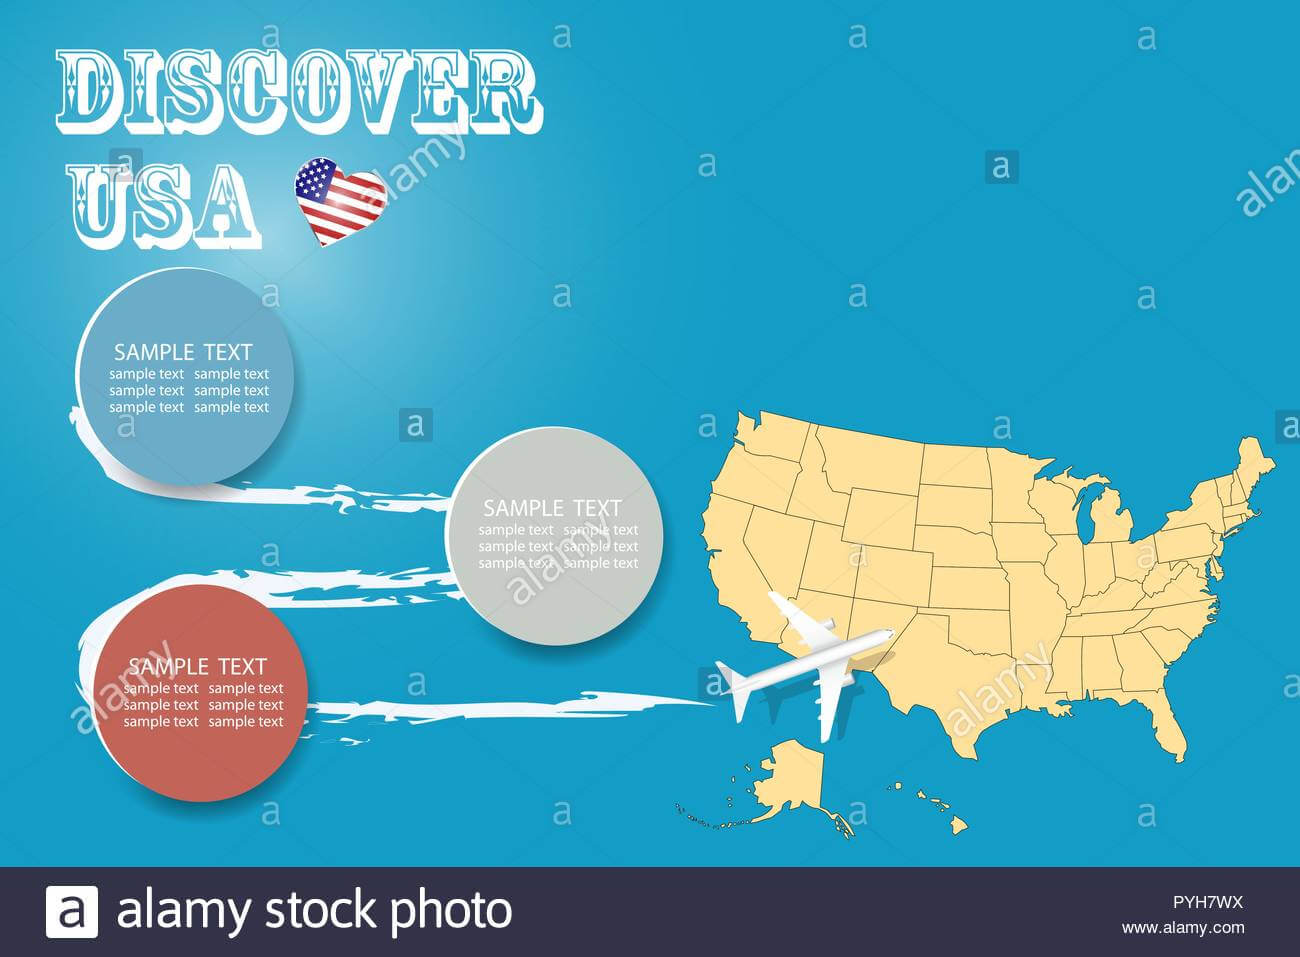 Discover Usa Blank Template With An Airplane Flying To The Intended For Blank Template Of The United States